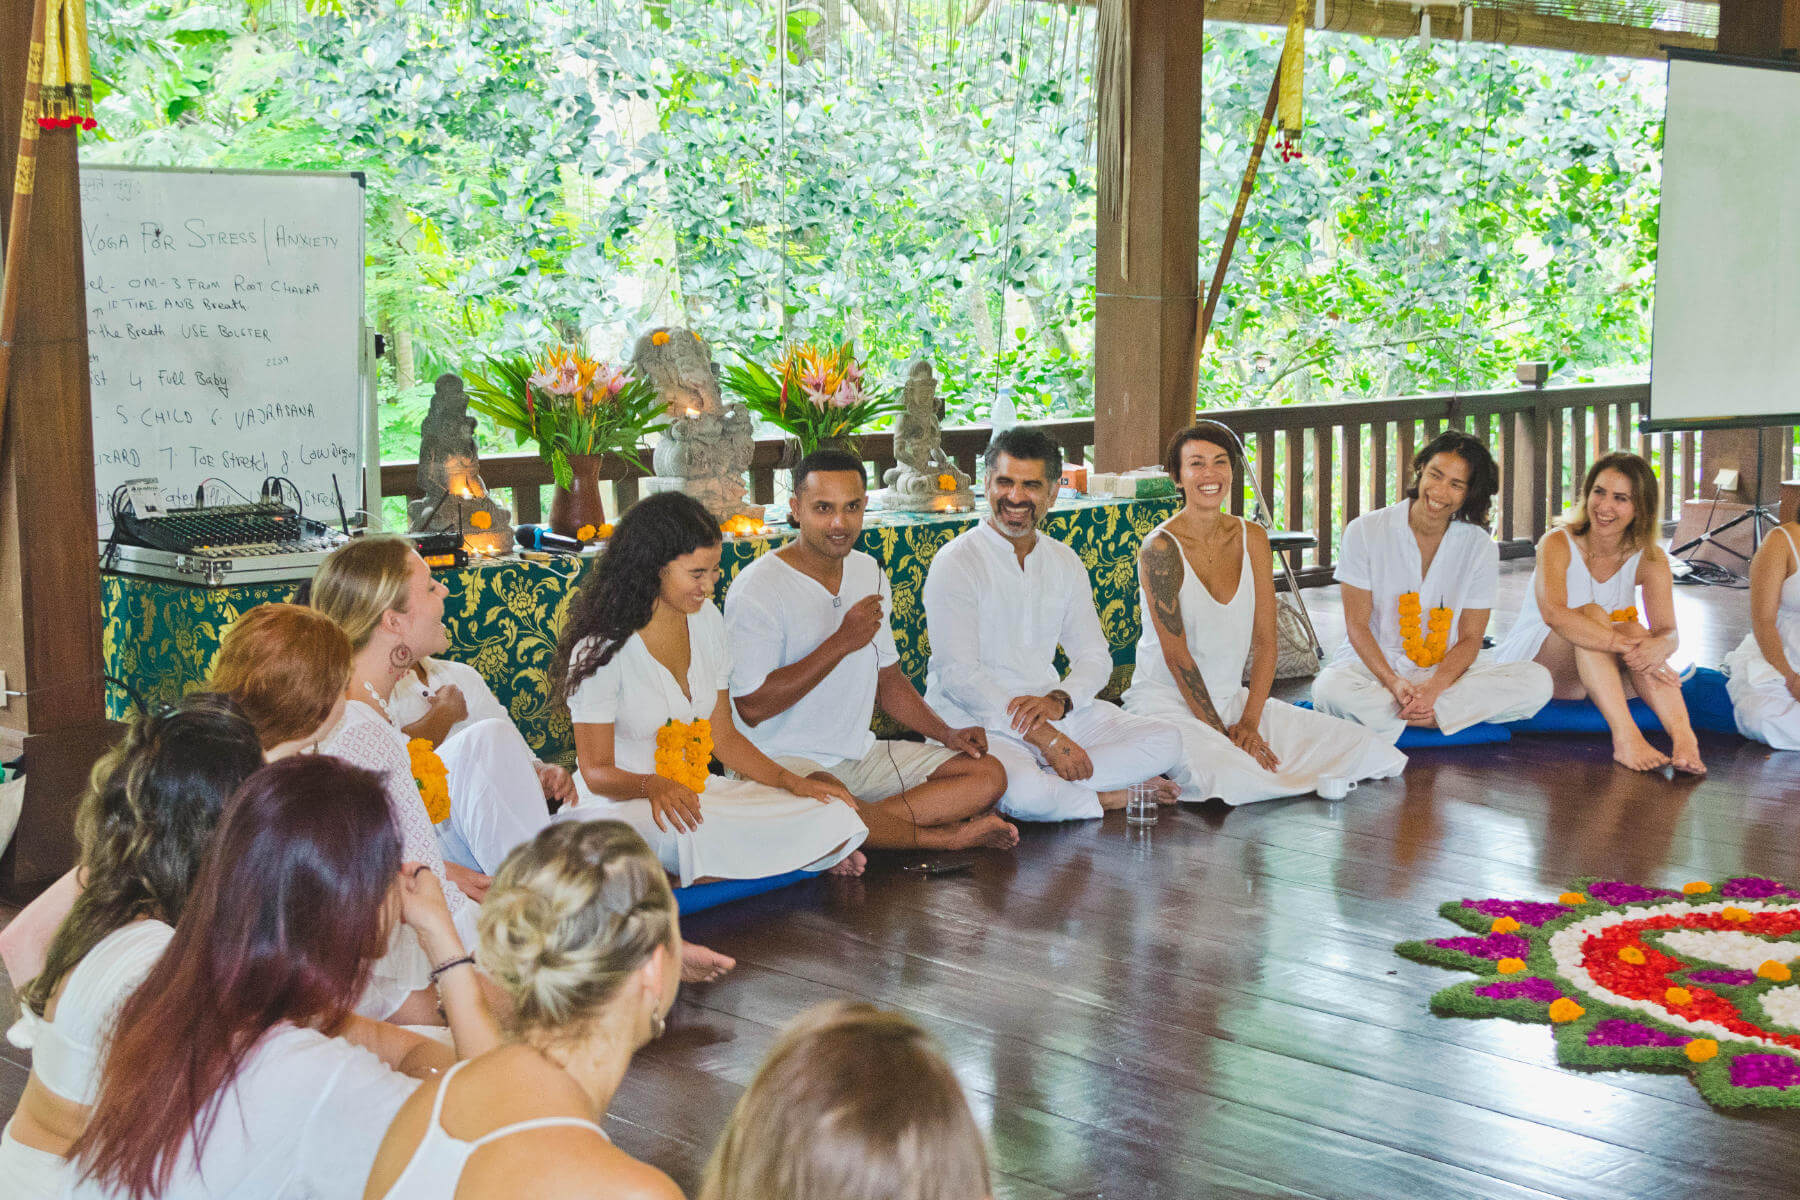 Group of people dressed in white, sitting in a circle at a yoga retreat at Namkhan Eco Farm in Luang Prabang, with flower decorations on the floor in a wooden-floored